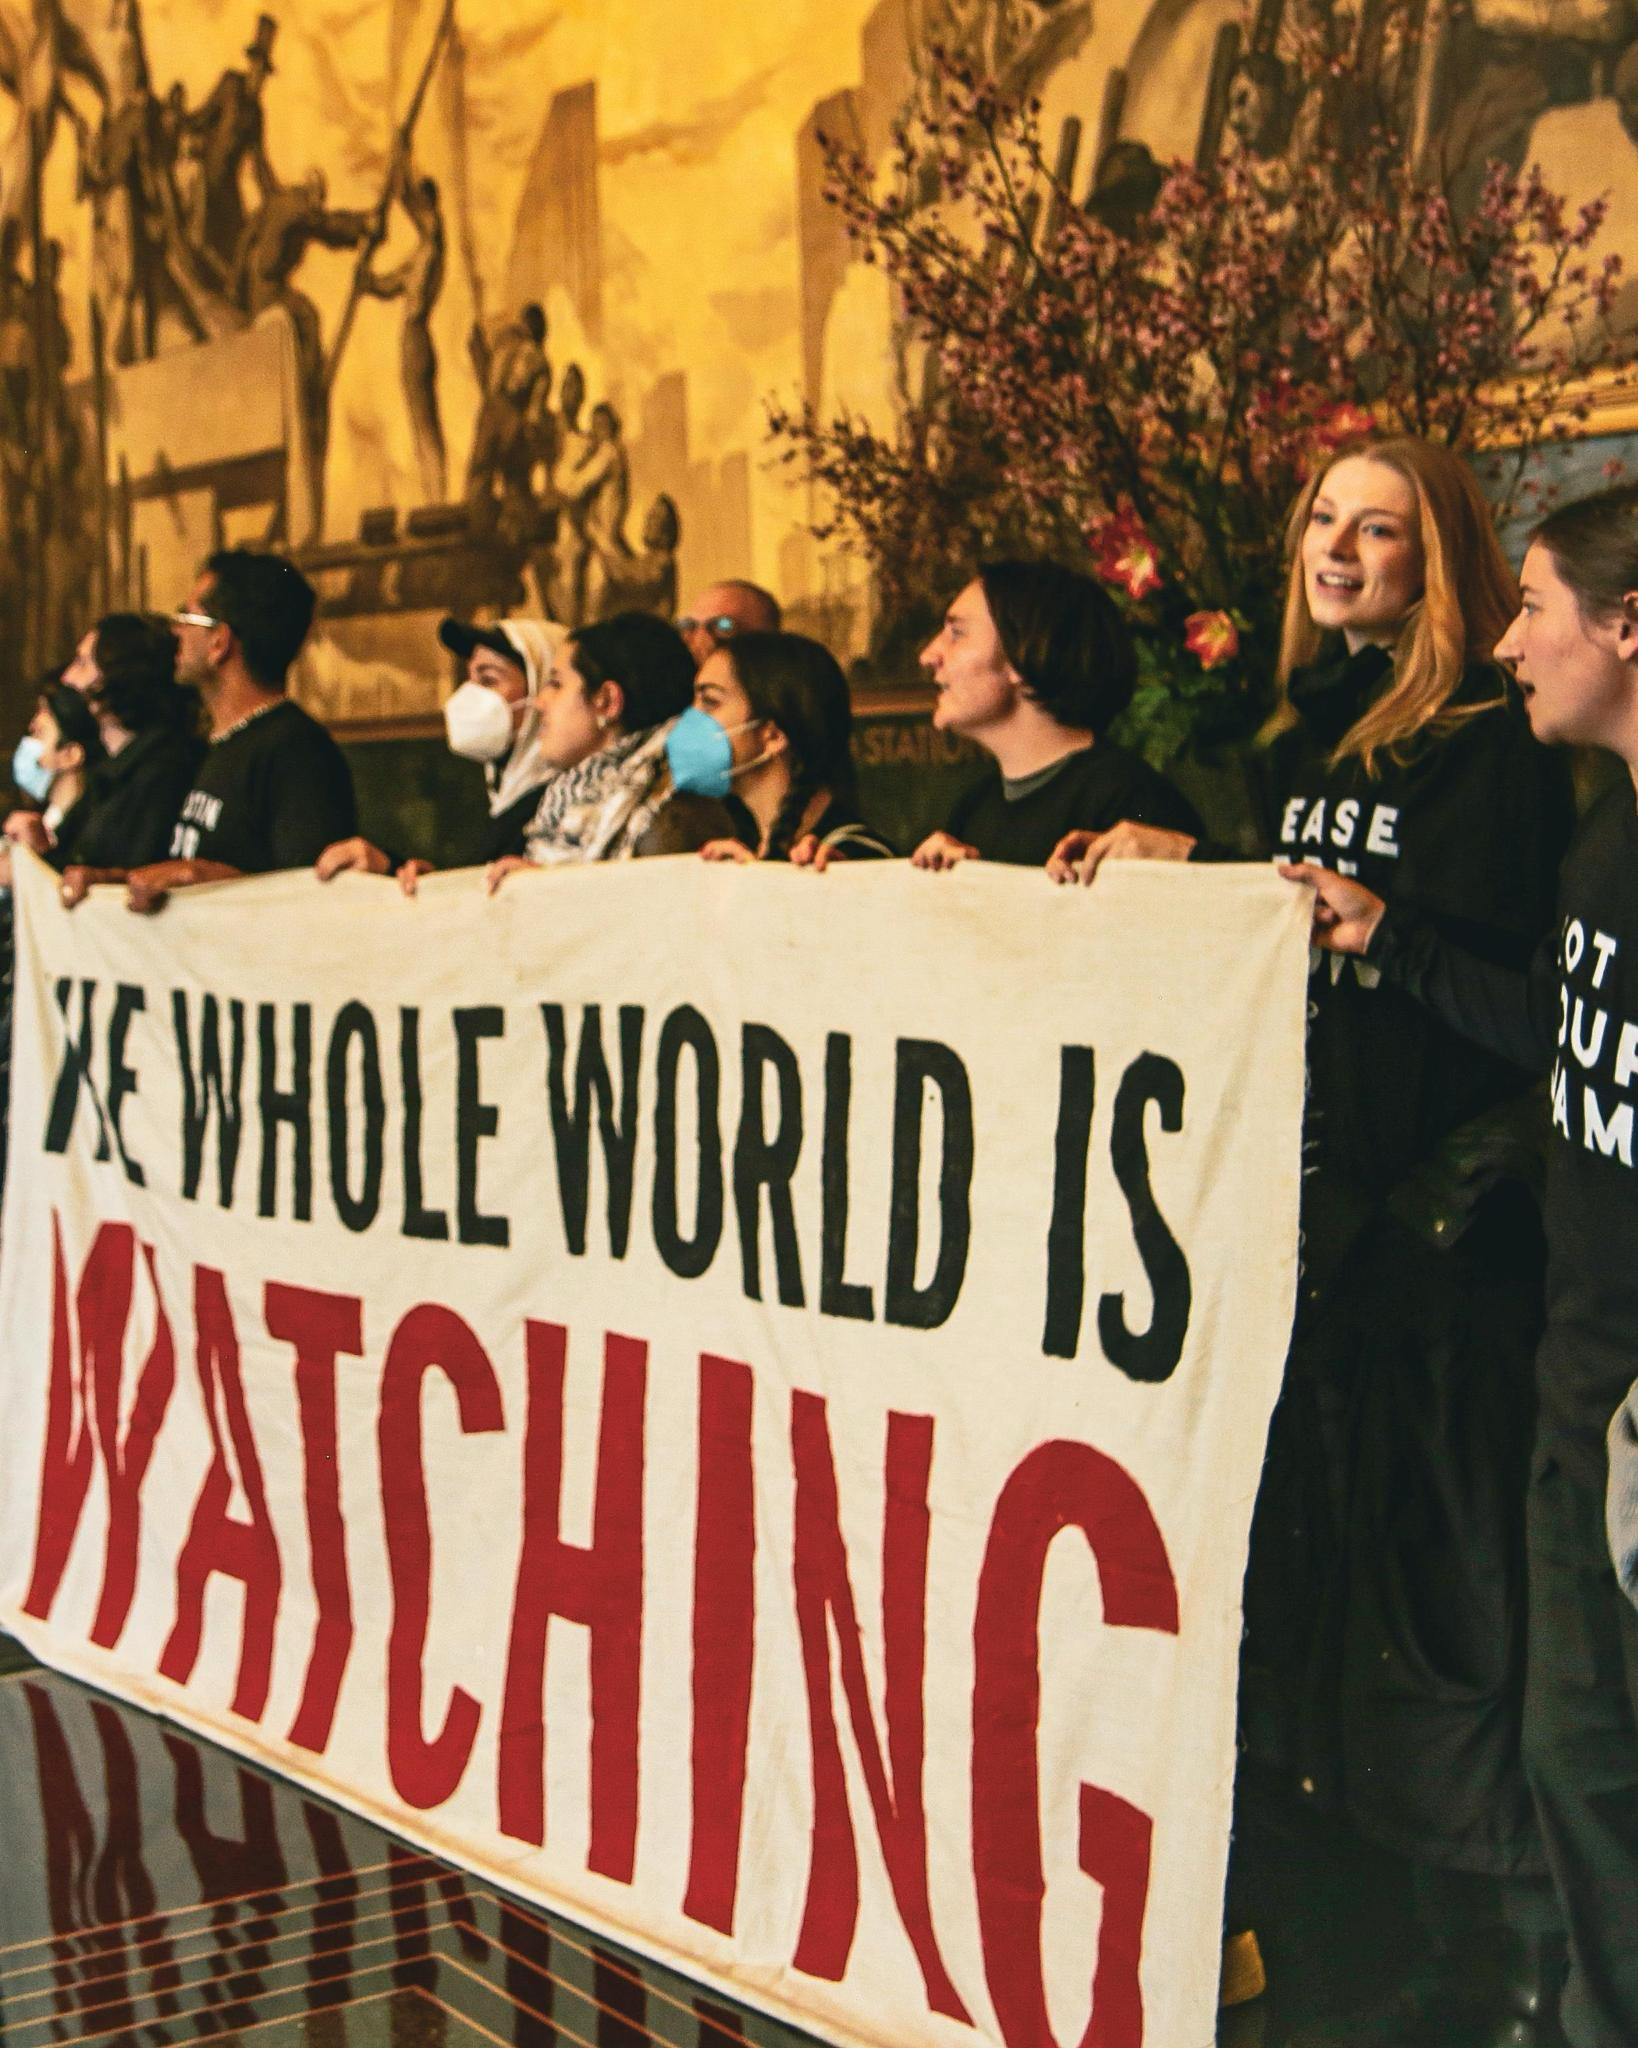 Group of individuals holding a banner reading &quot;THE WHOLE WORLD IS WATCHING&quot; at an event